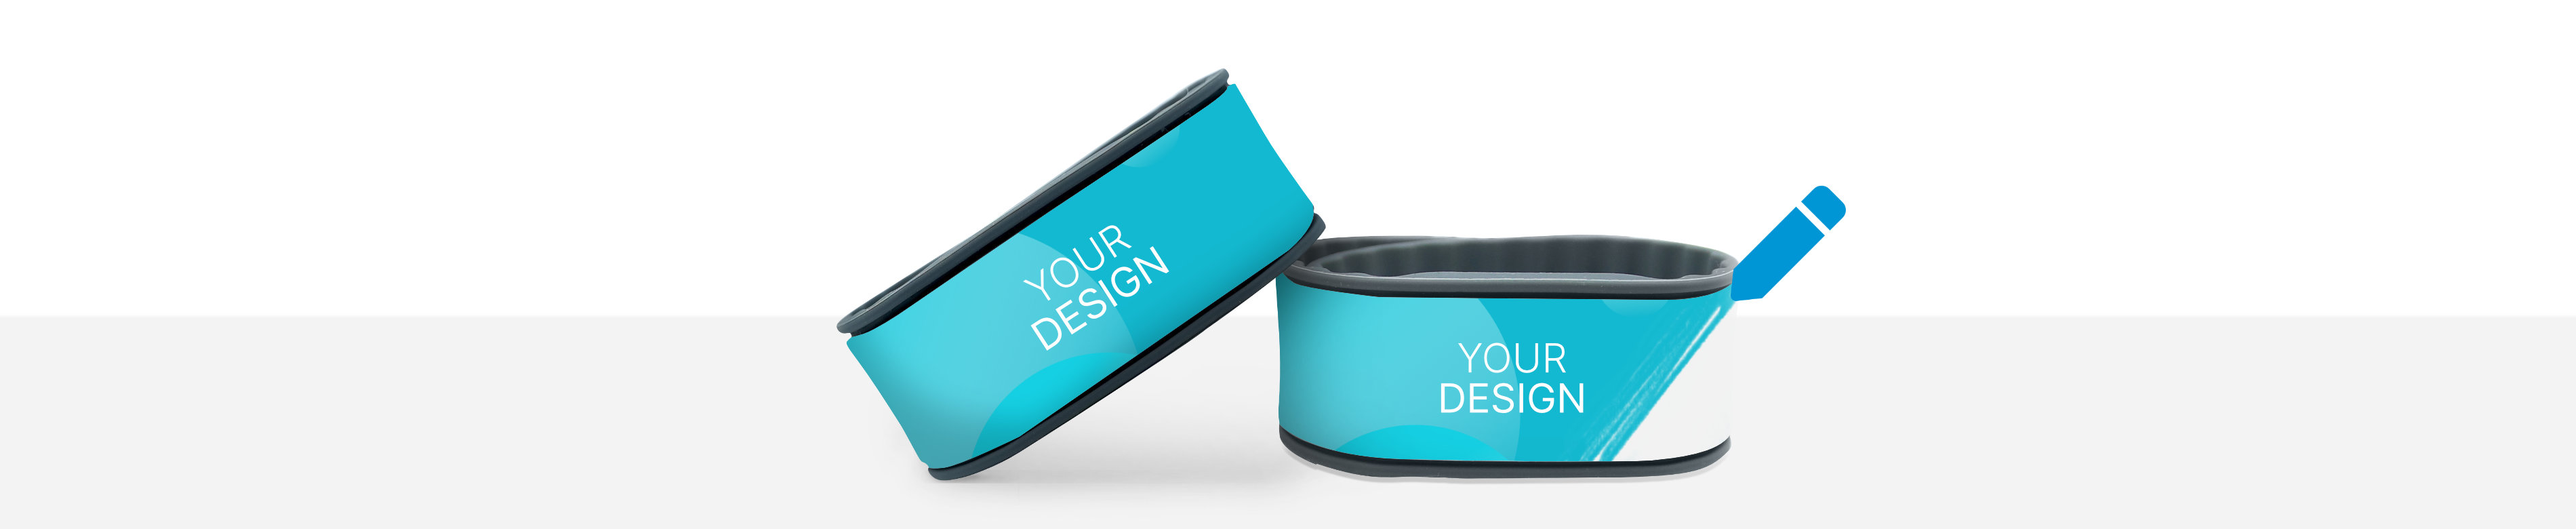 NFC wristbands with the inscription "Your Design"